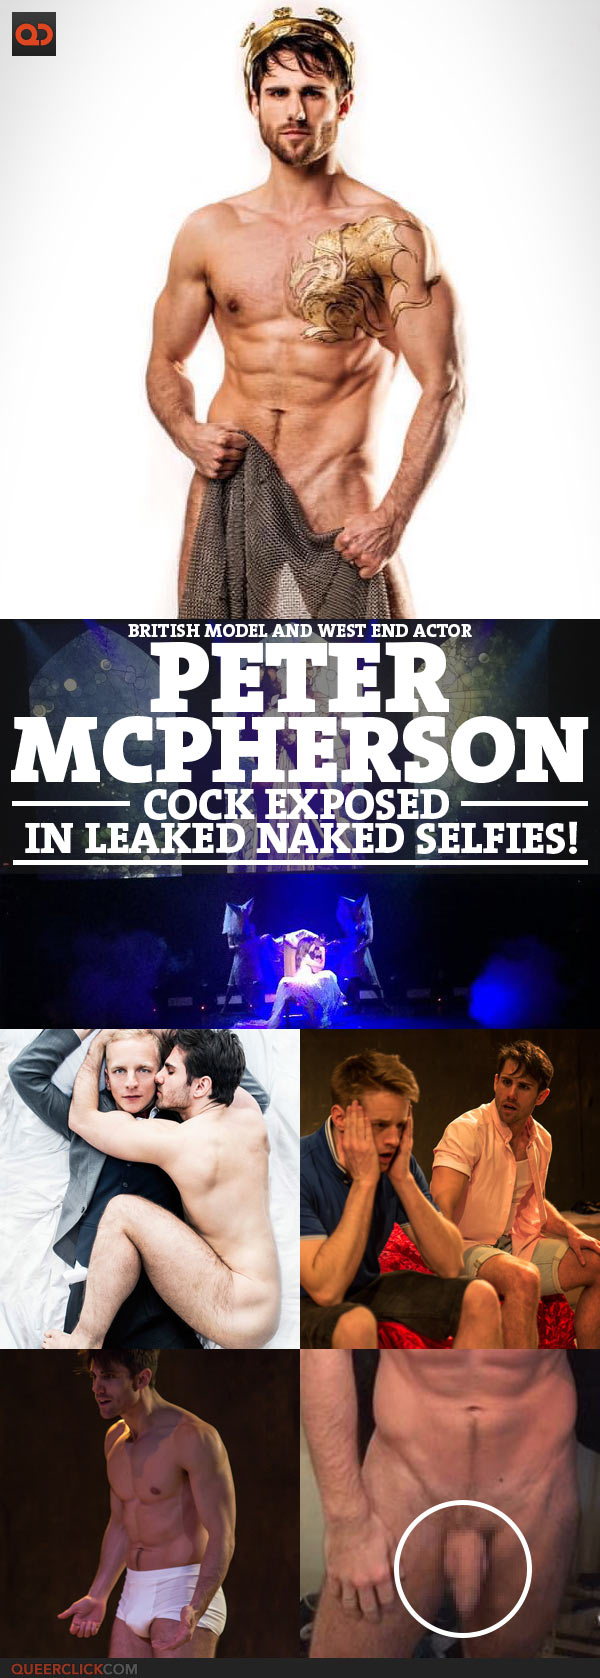 Peter Mcpherson, British Model And West End Actor, Cock Exposed In Leaked Naked Selfies!